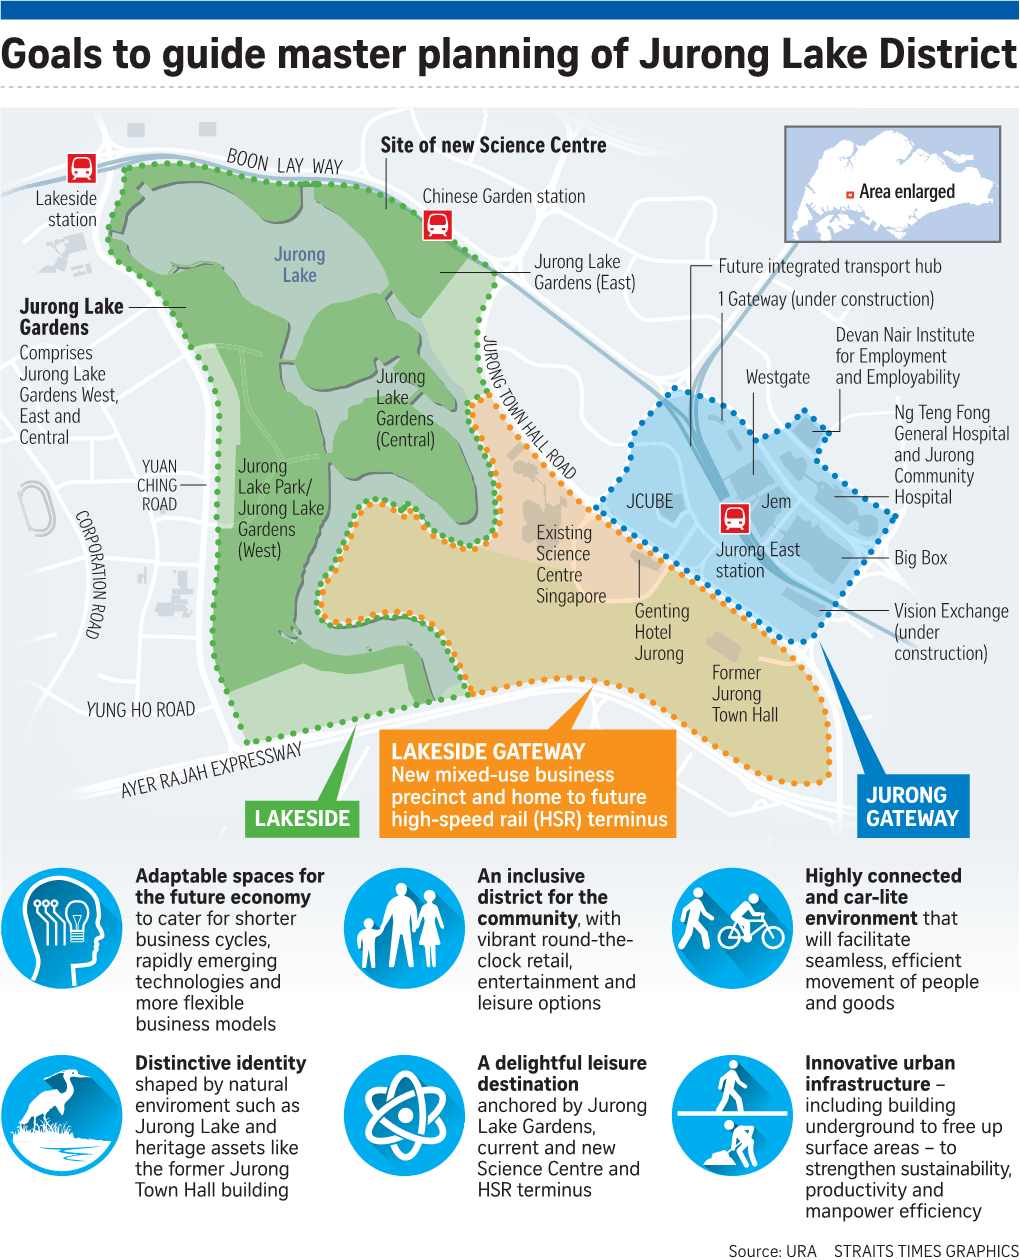 Goals to Guide Master Planning of Jurong Lake District